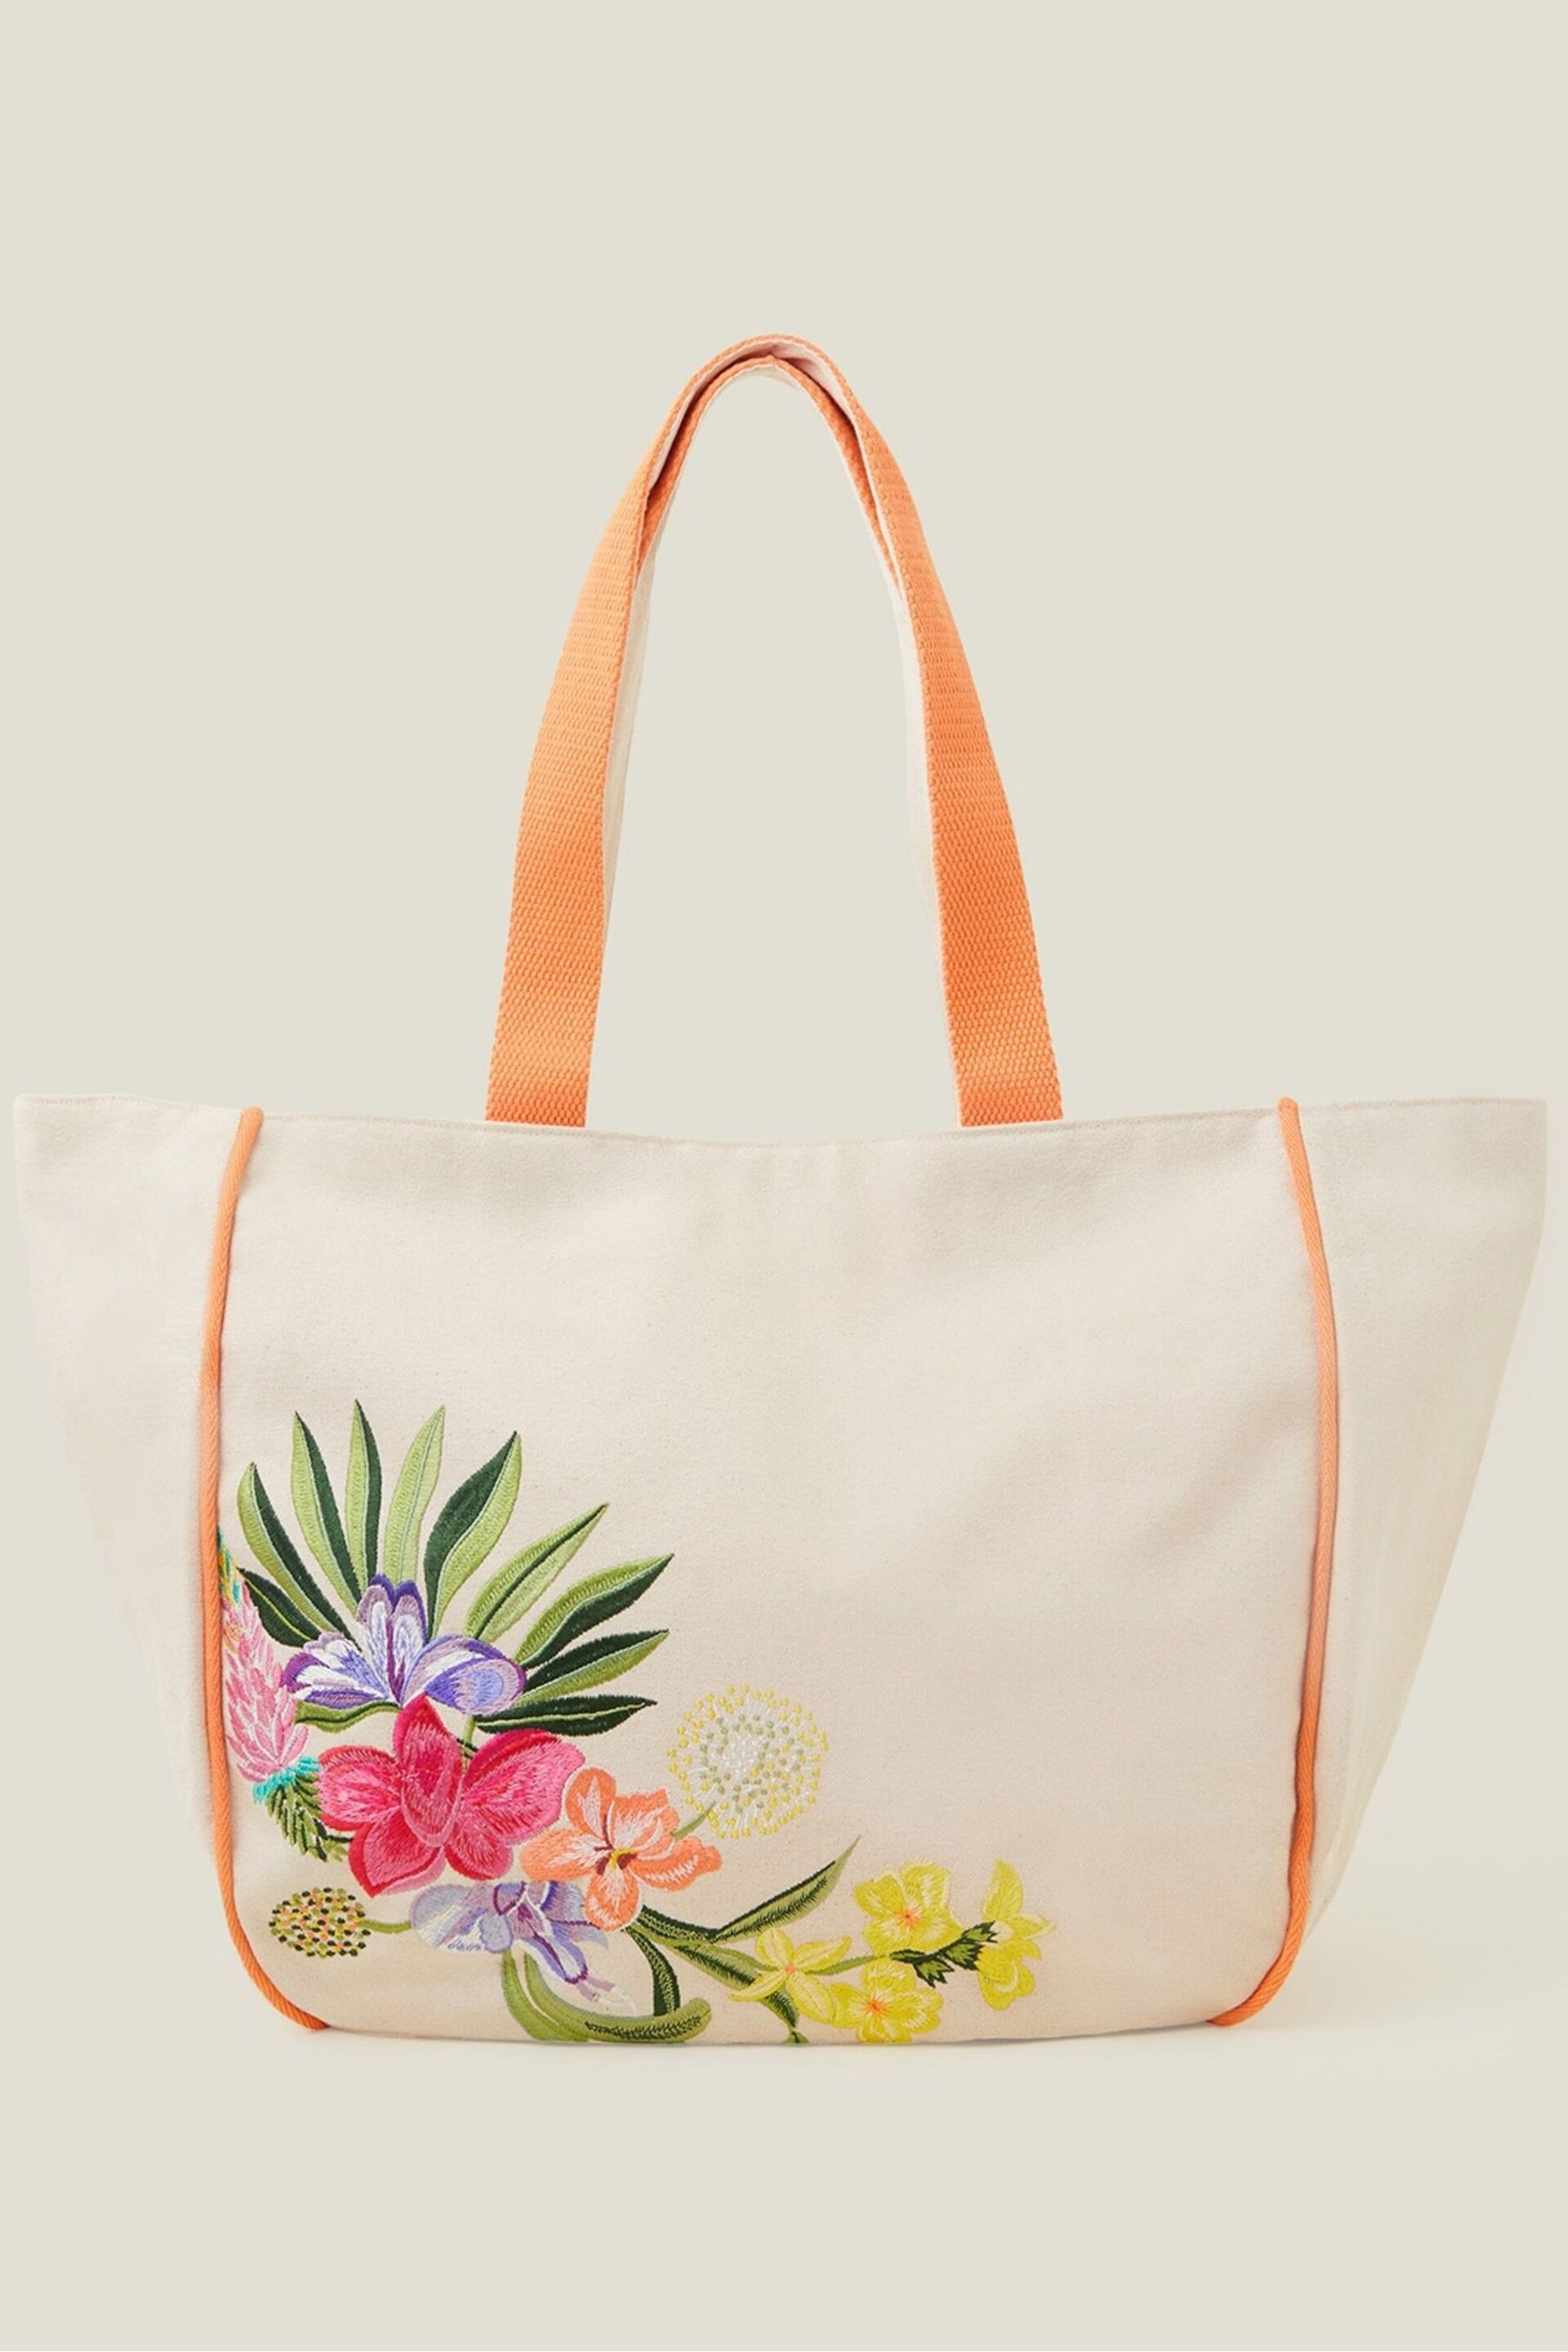 Accessorize Natural Embroidered Tote Bag - Image 2 of 3